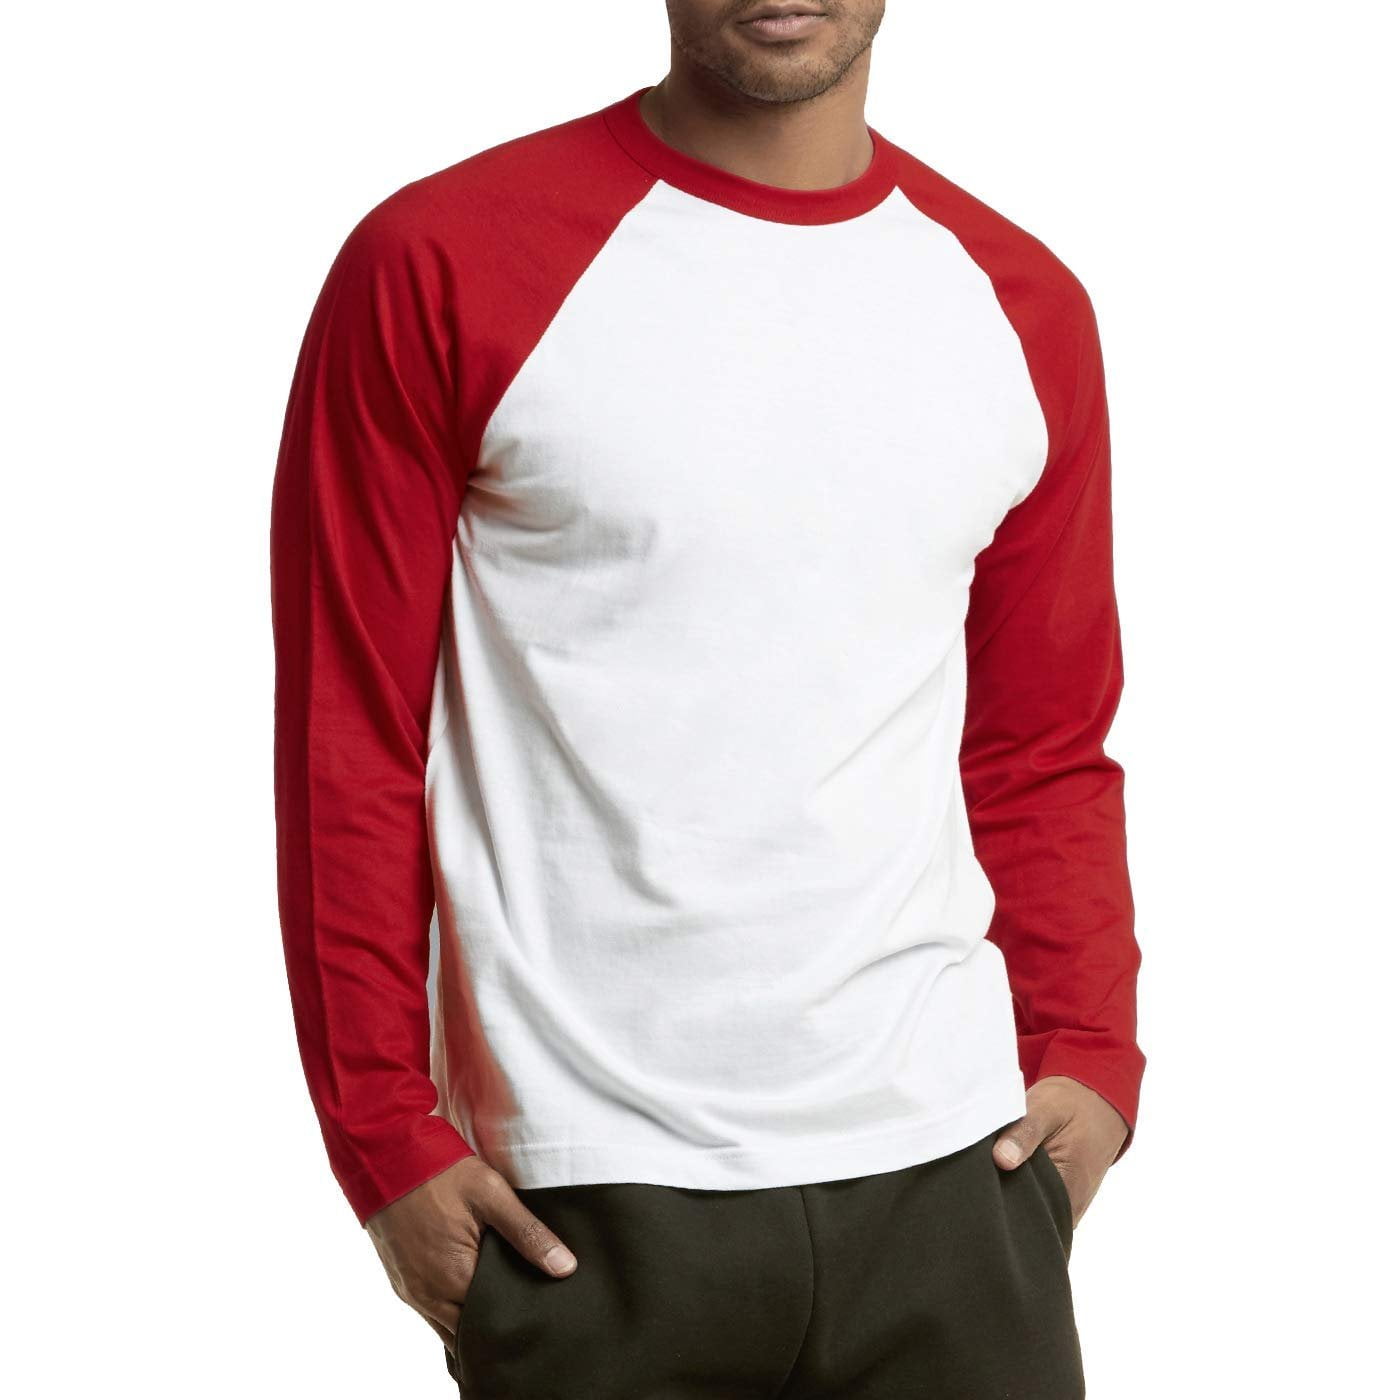 mens white and red shirt